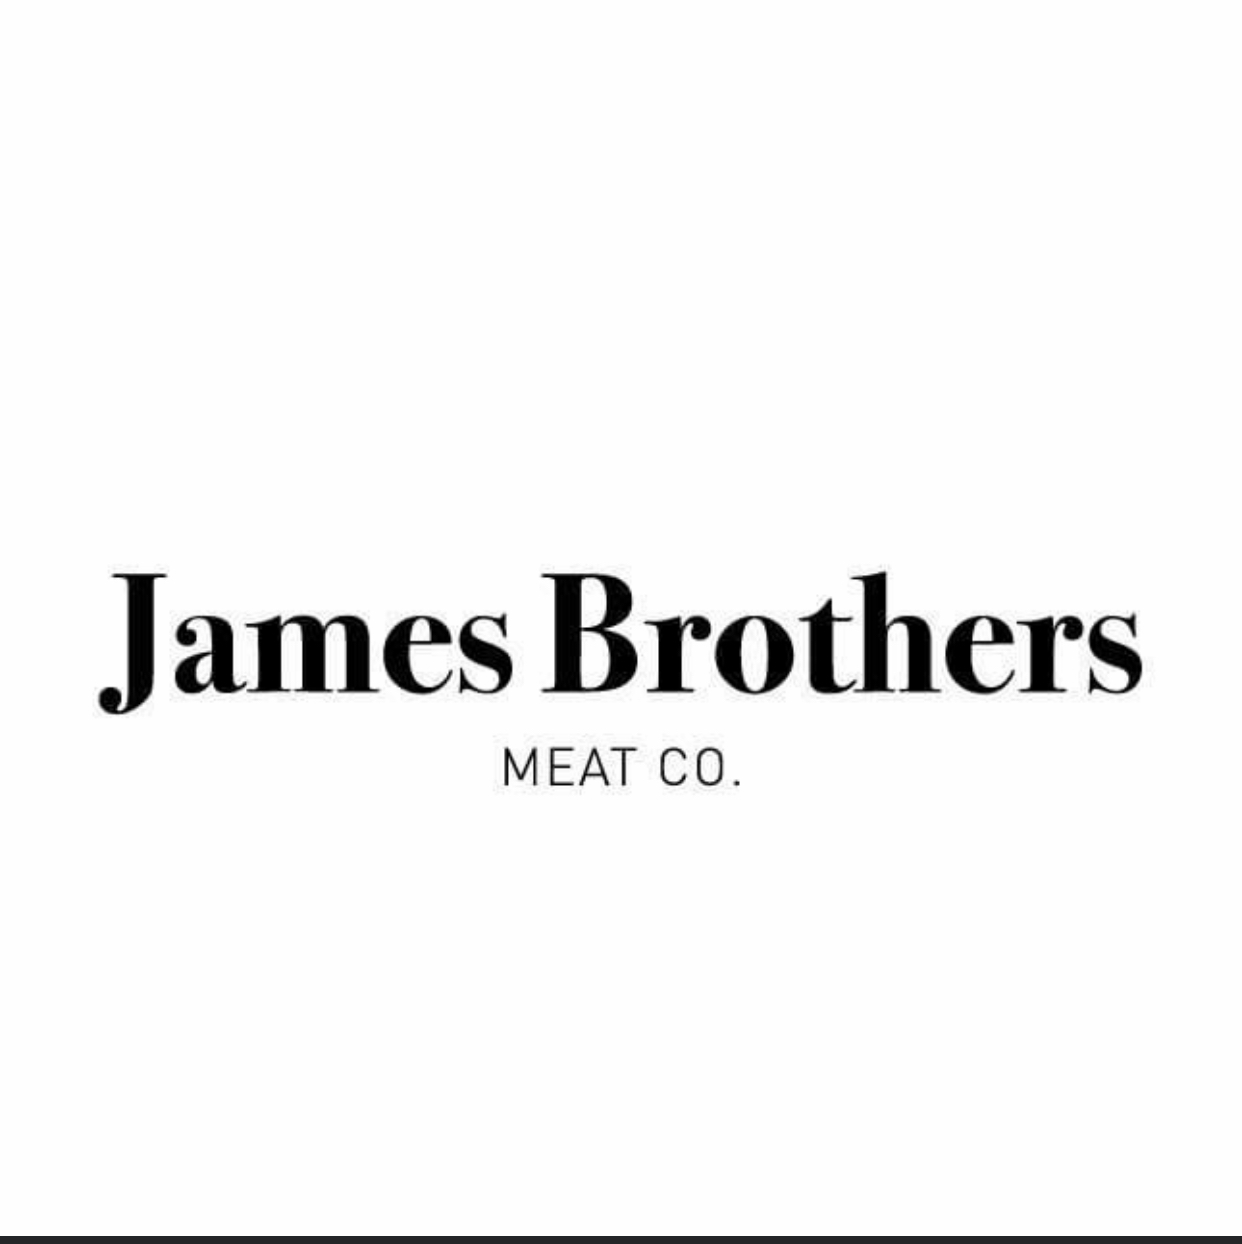 James Brothers Meat Co.